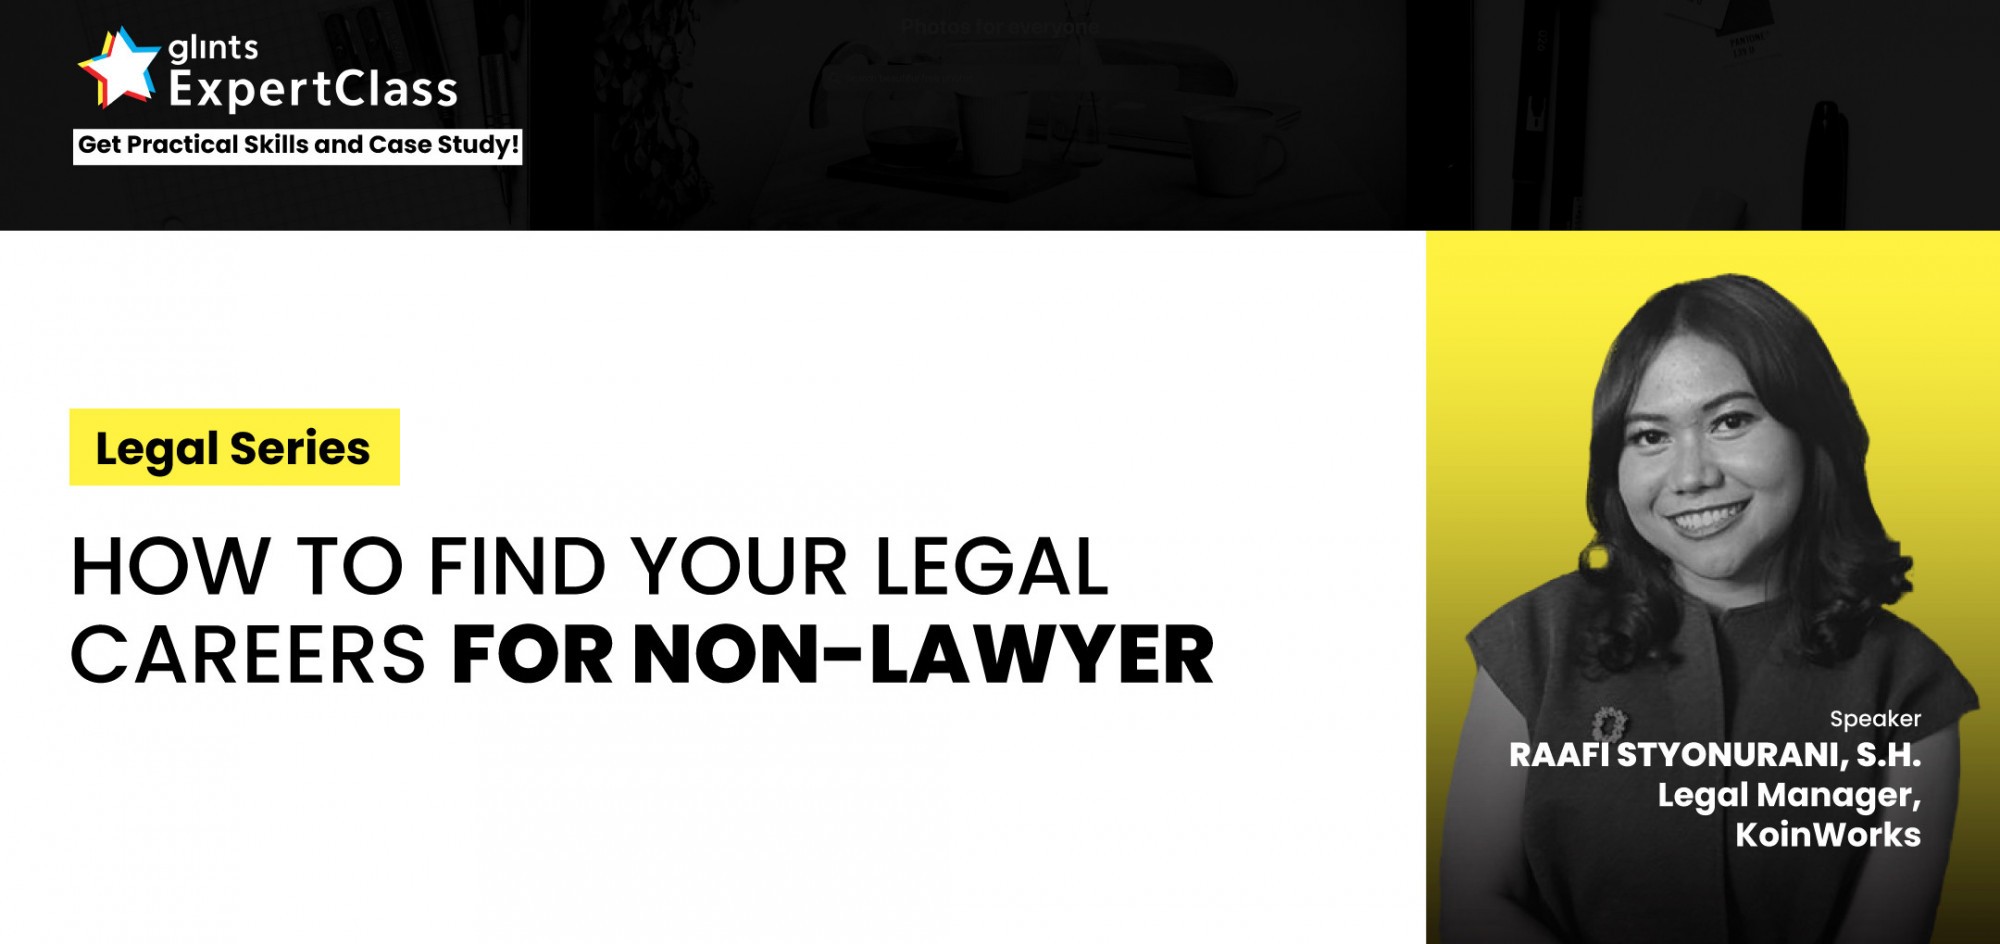 [Online Glints ExpertClass] How to Find Your Legal Careers for Non-Lawyer